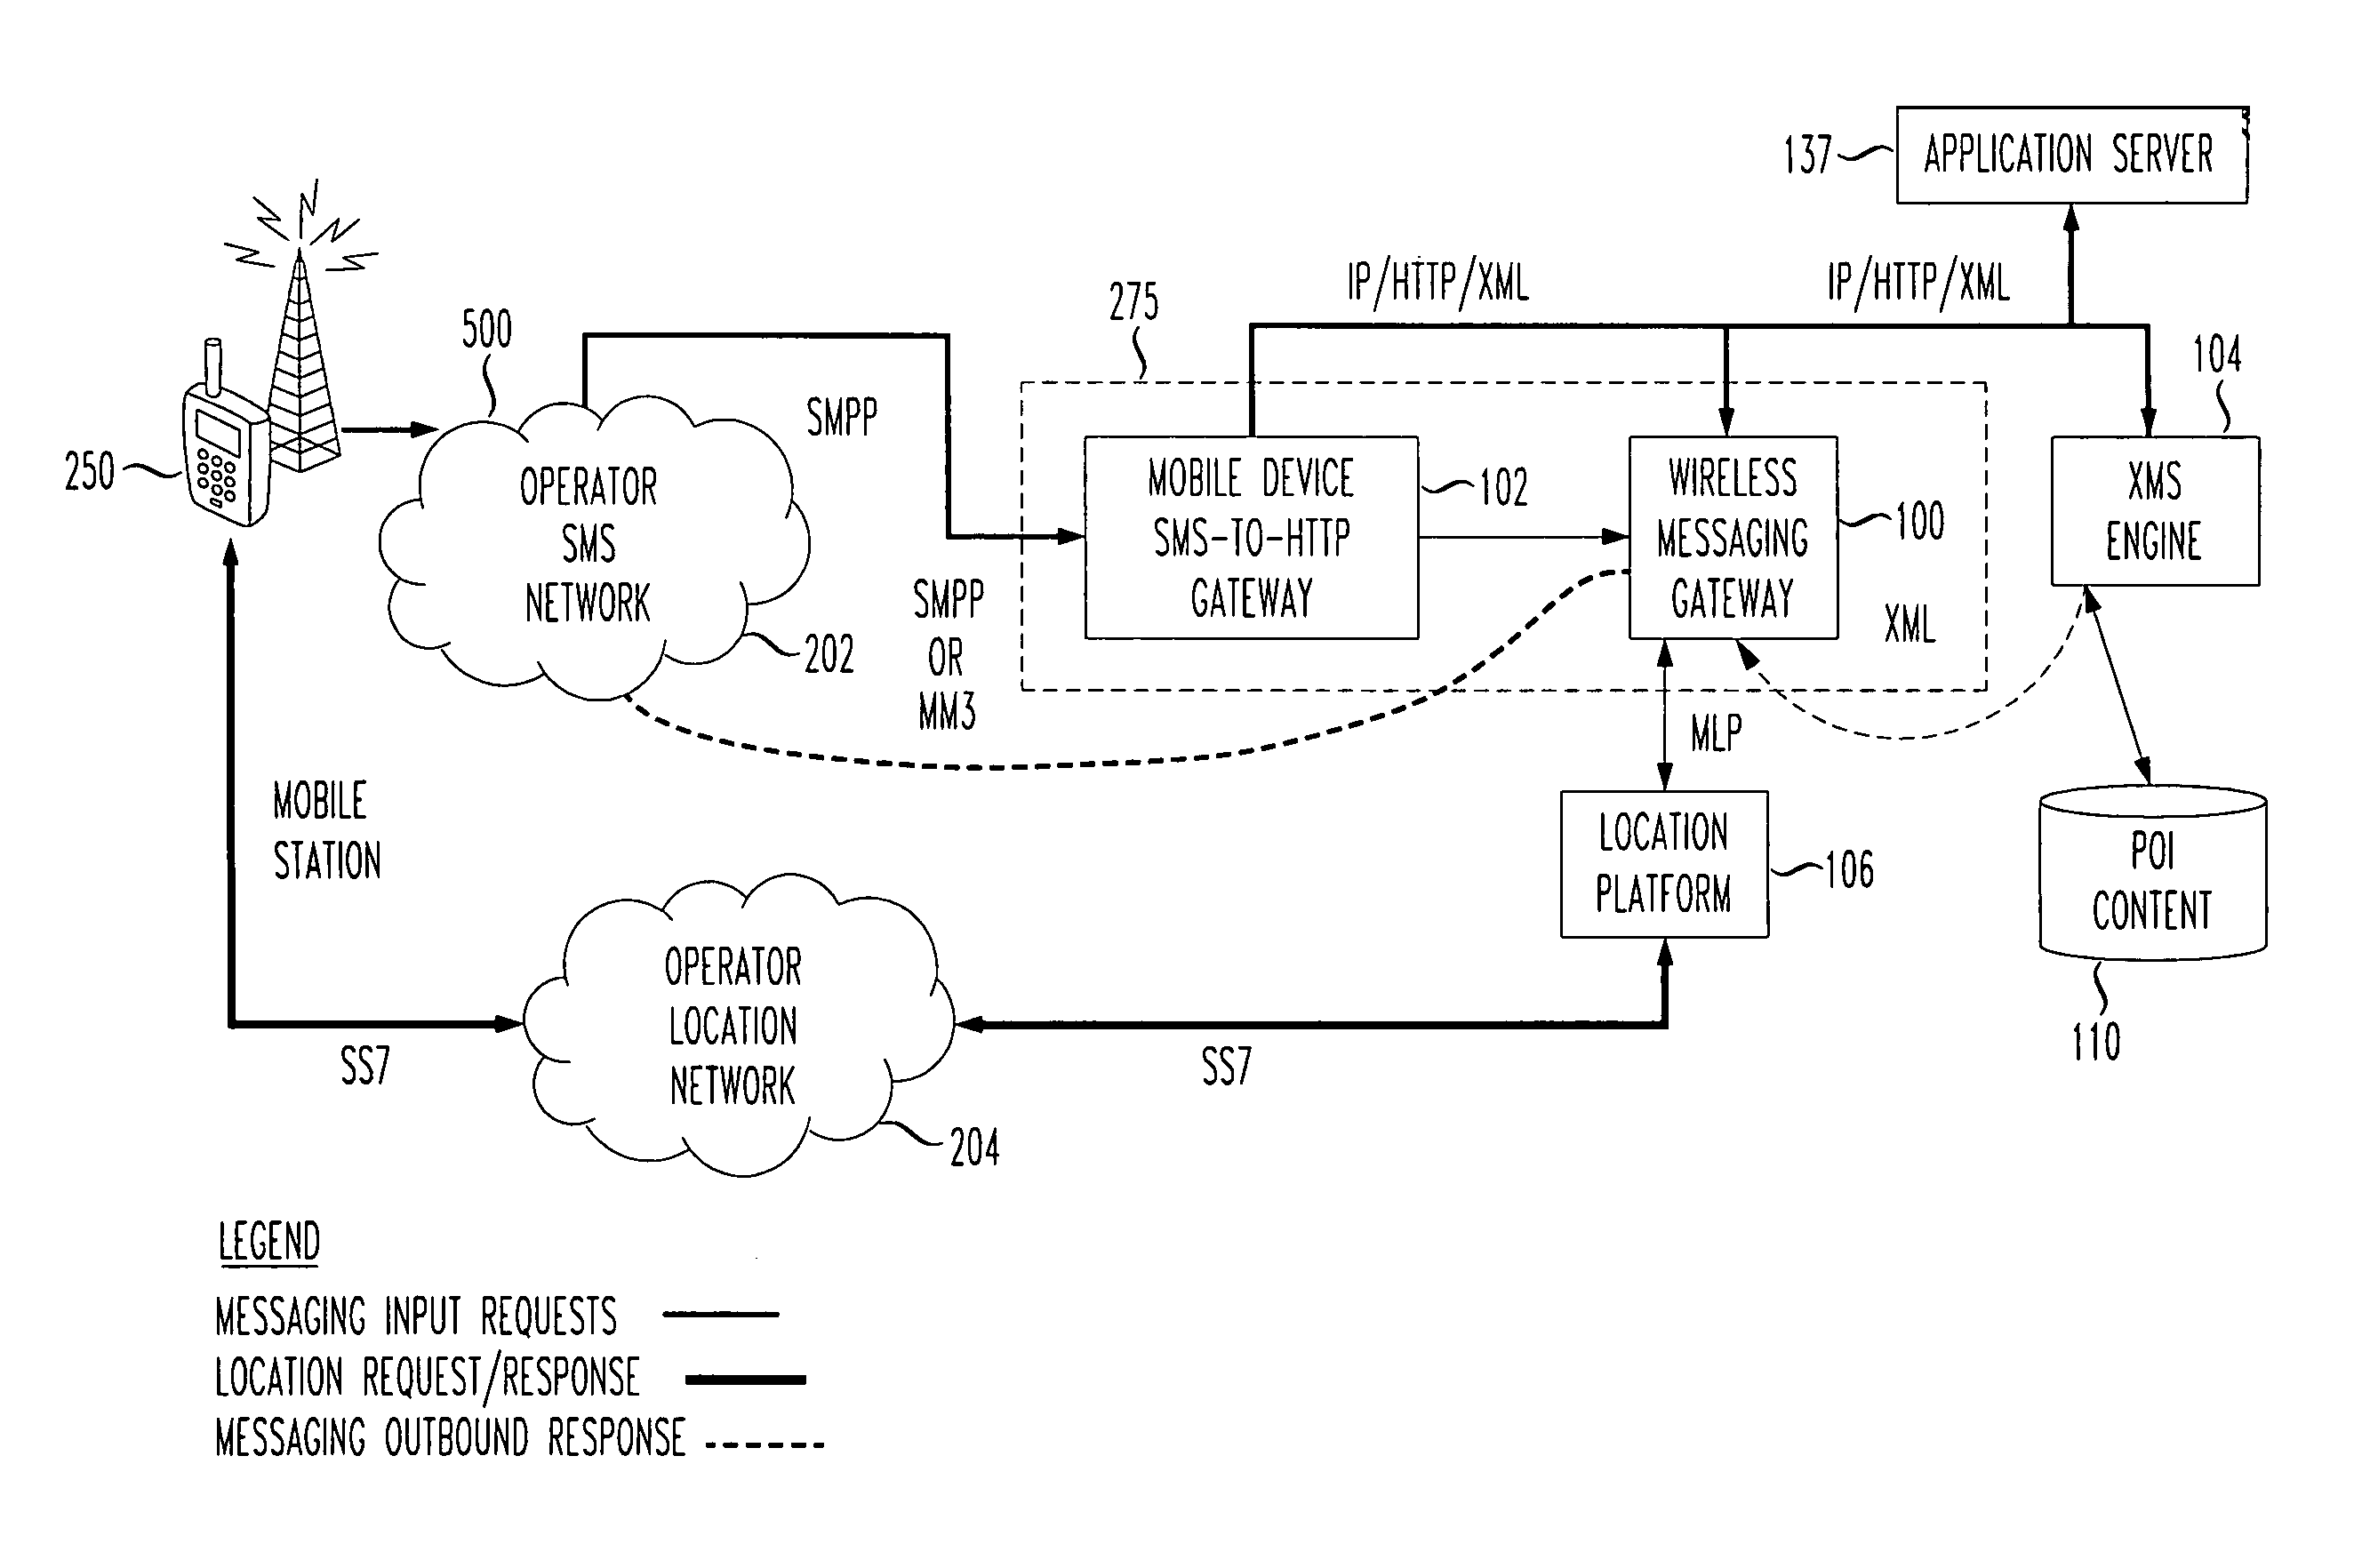 Short messaging system (SMS) proxy communications to enable location based services in wireless devices